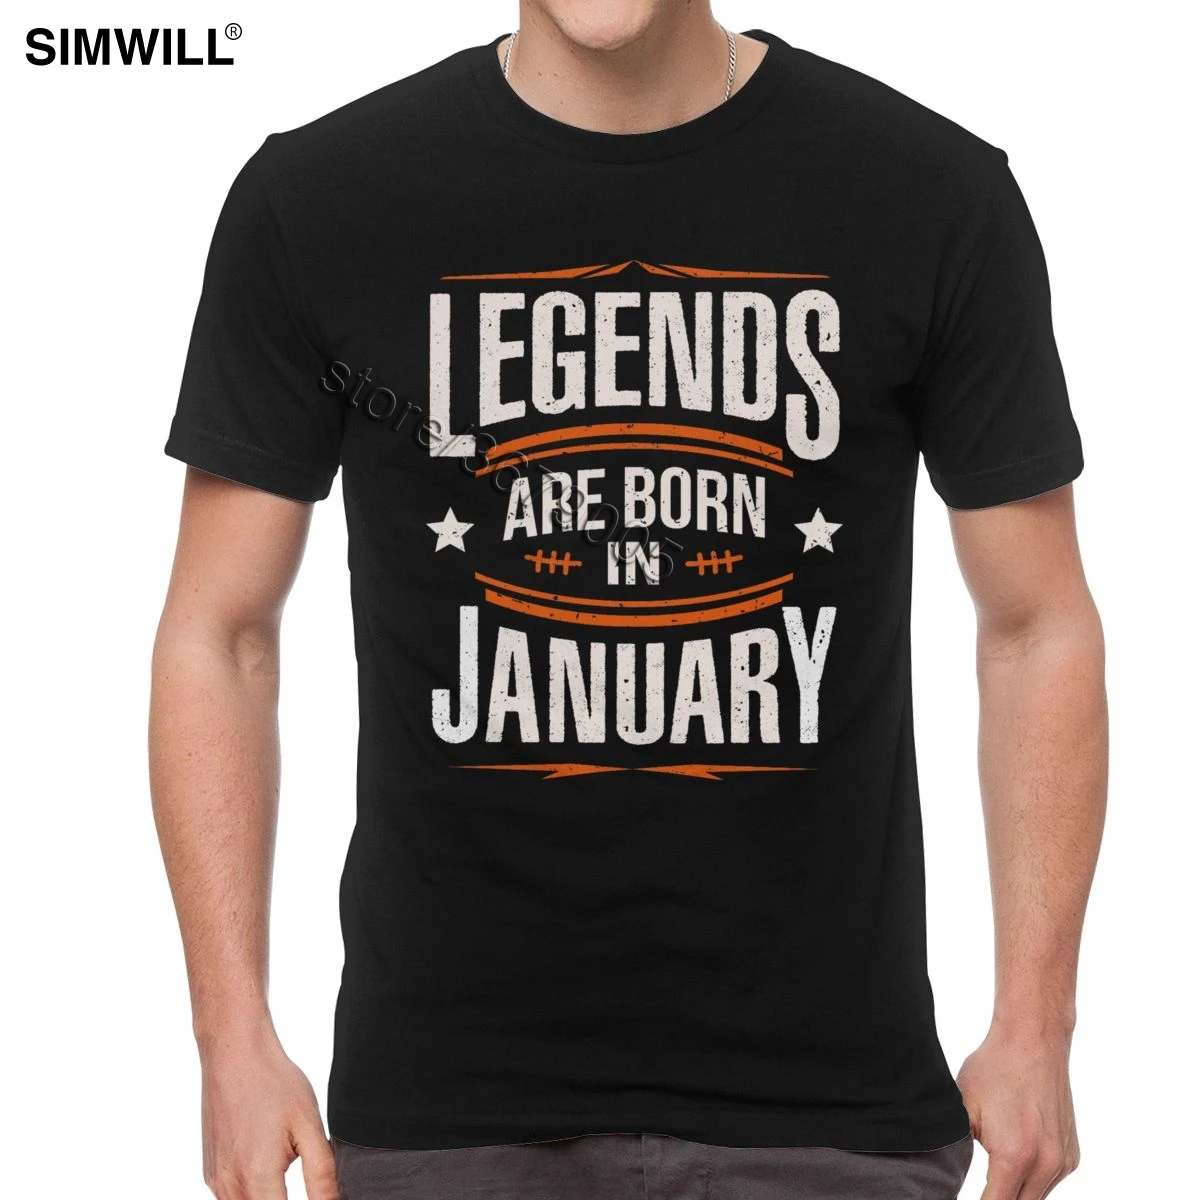 

Vintage Legends Are Born In January T Shirt Men Cotton Birthday Gift Idea Tee Short Sleeves Casual Summer T-Shirt Oversized Tops